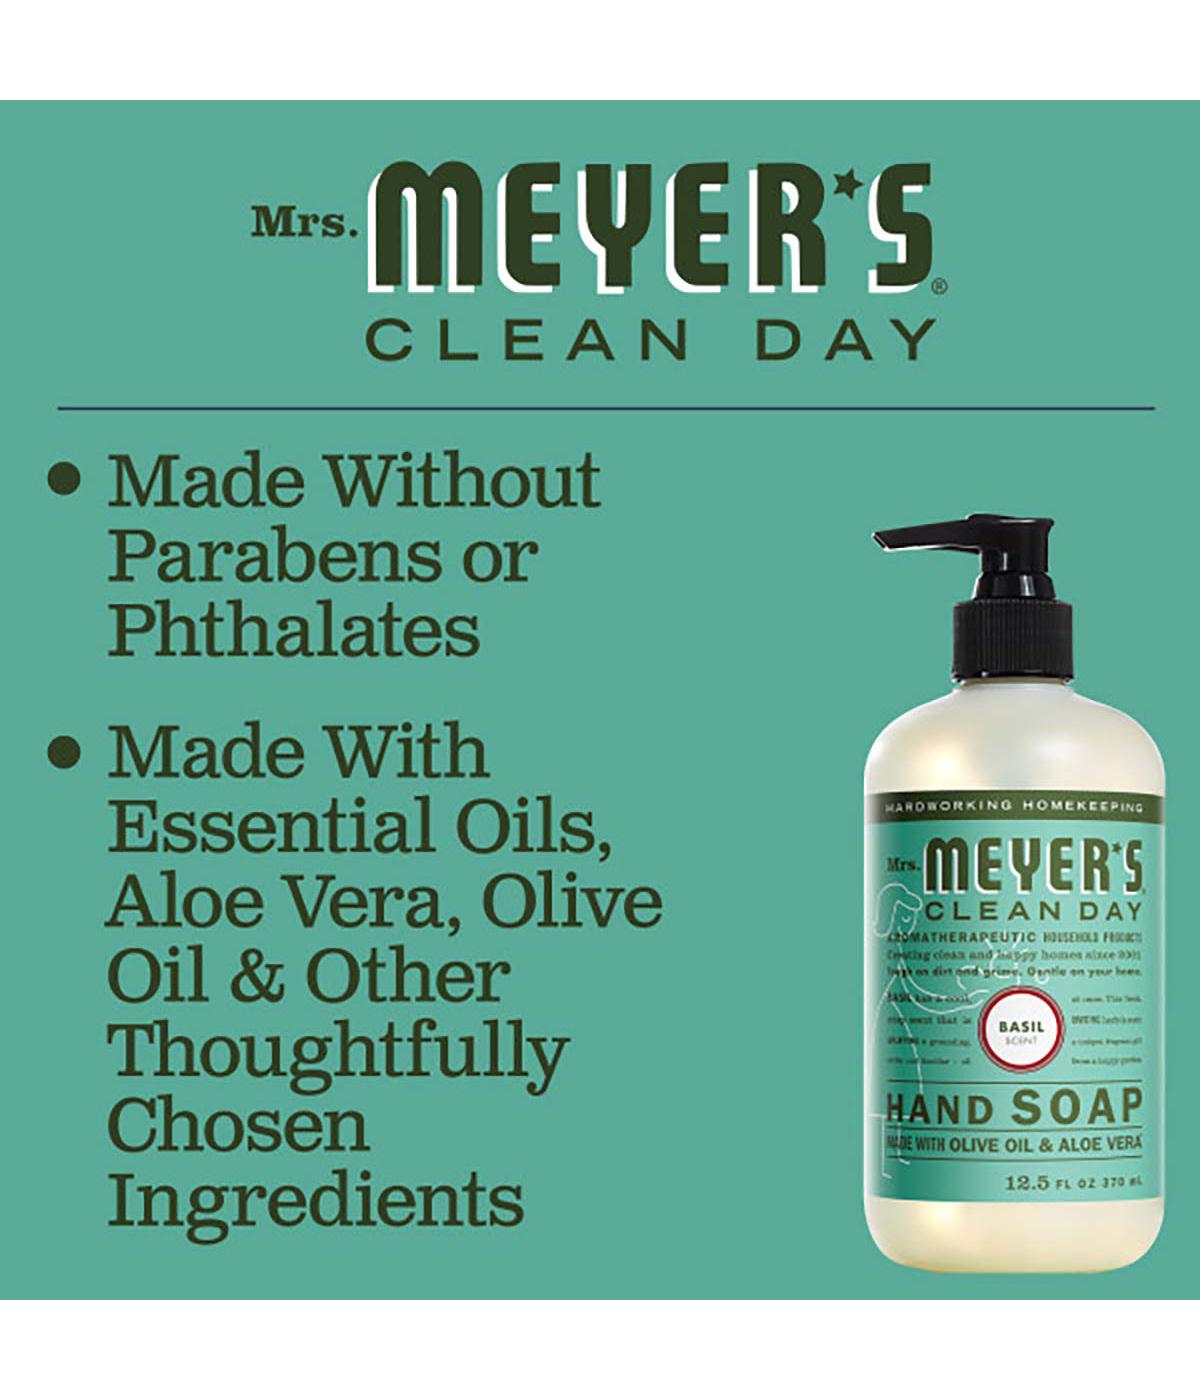 Mrs. Meyer's Clean Day Basil Scent Liquid Hand Soap; image 5 of 6